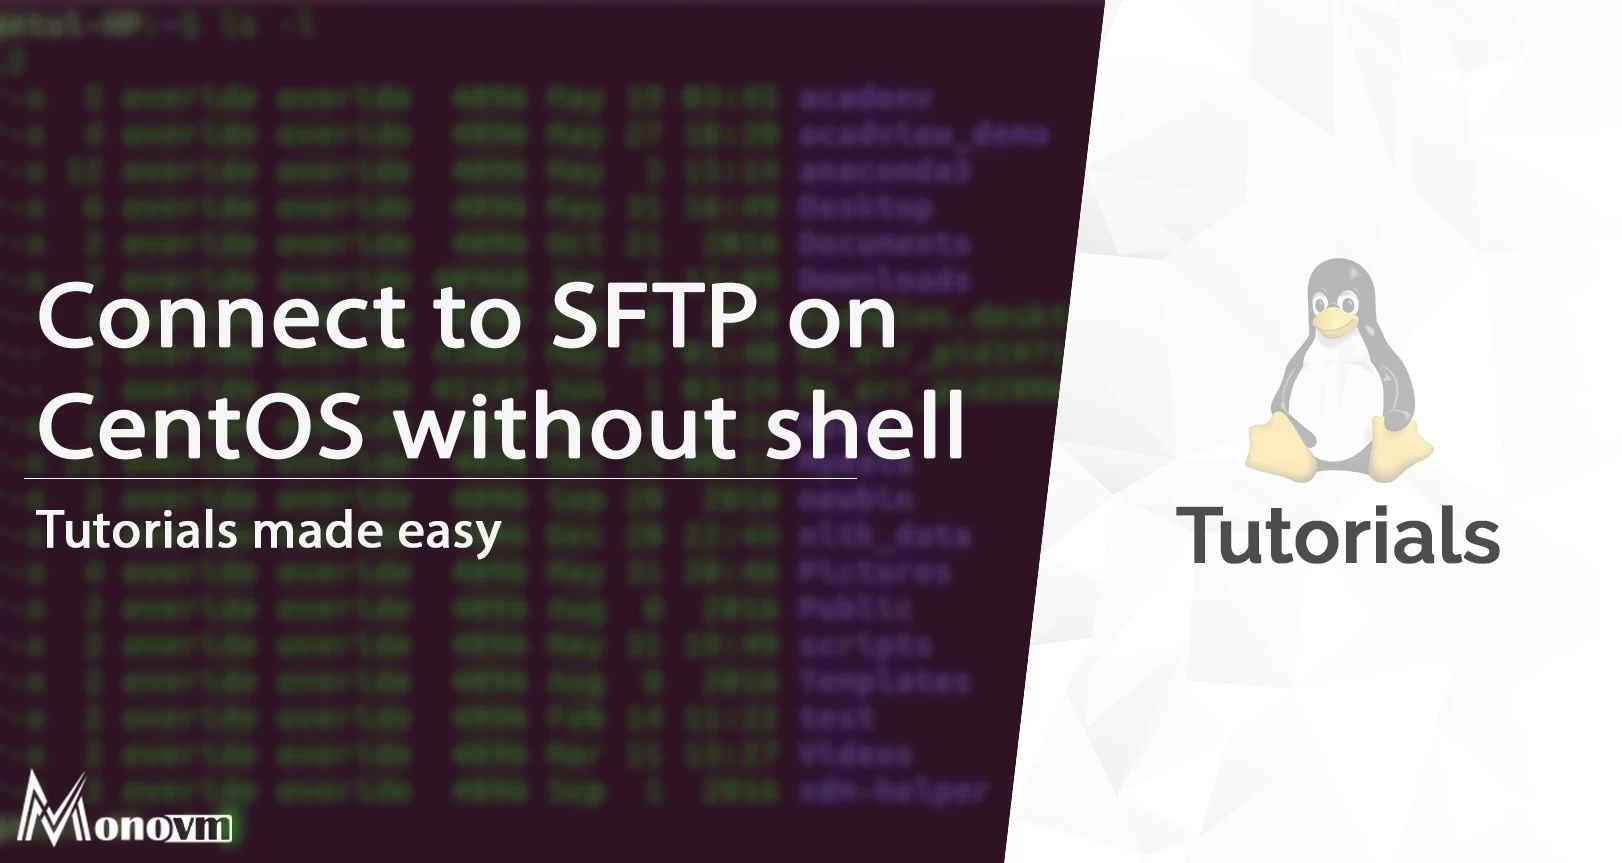 Connect to SFTP on CentOS Without Shell Access